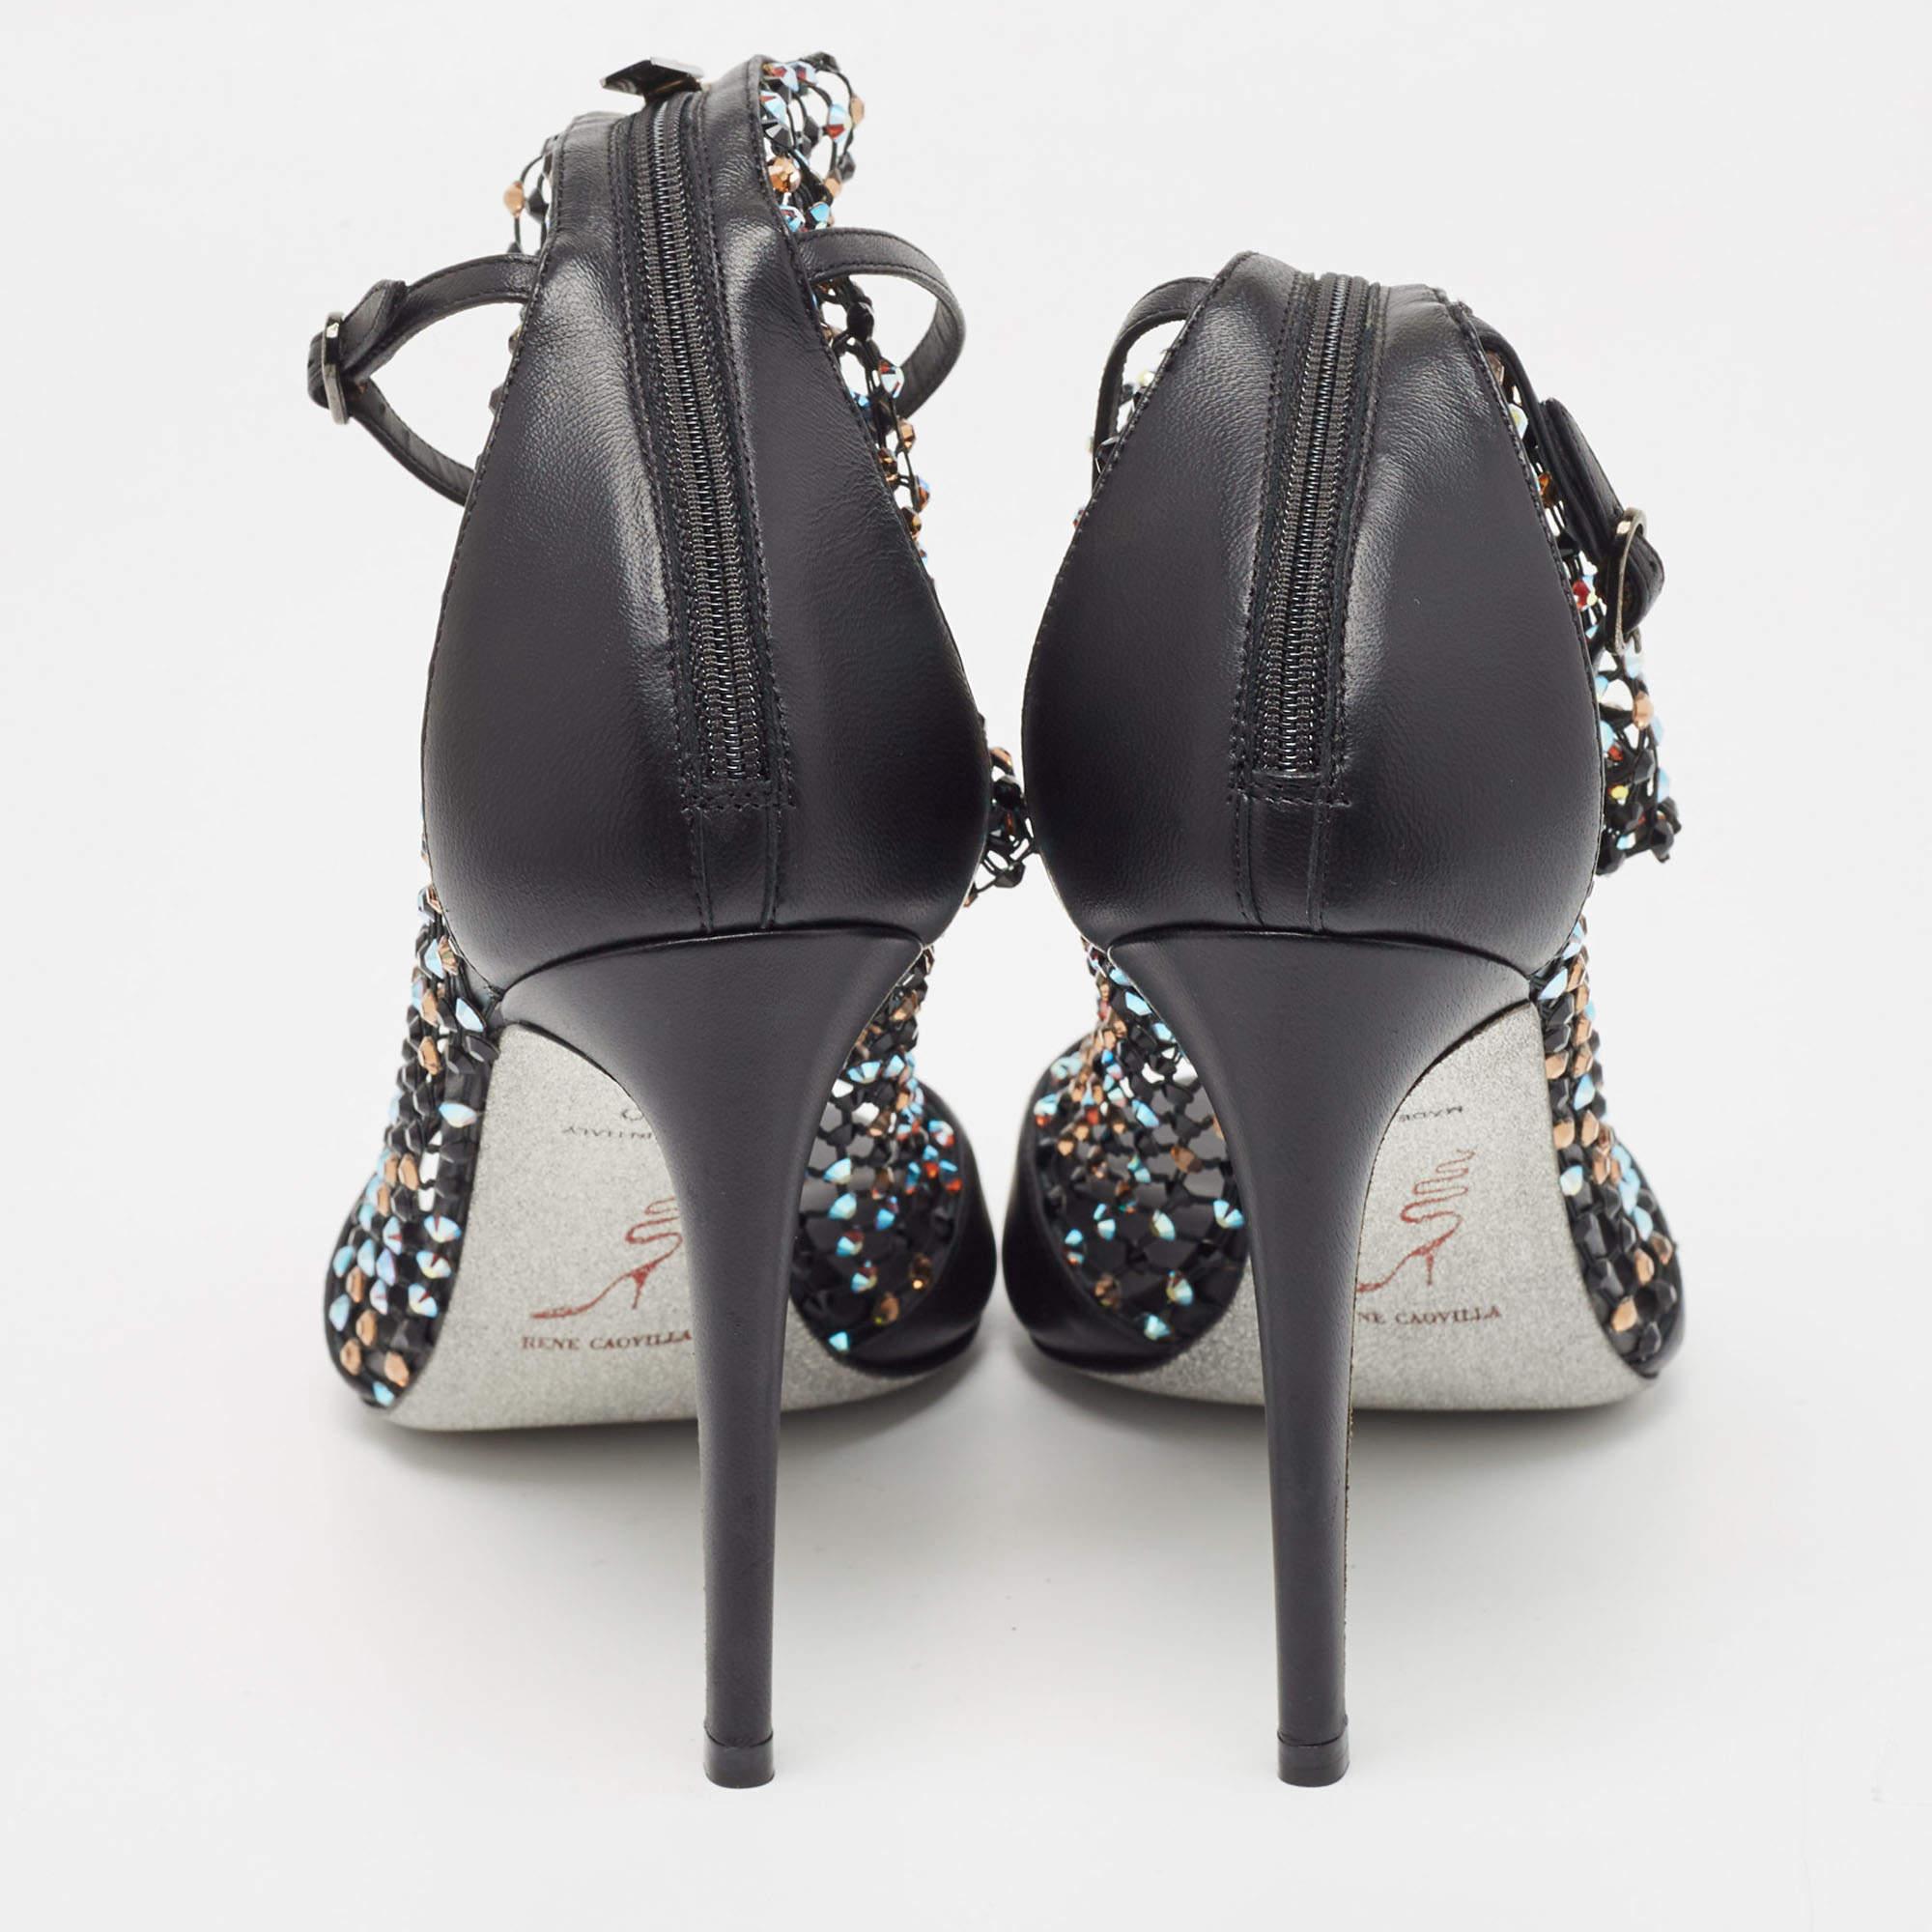 Rene Caovilla Black Leather and Crystal Embellished Mesh Galaxia Sandals Size 40 In Excellent Condition For Sale In Dubai, Al Qouz 2